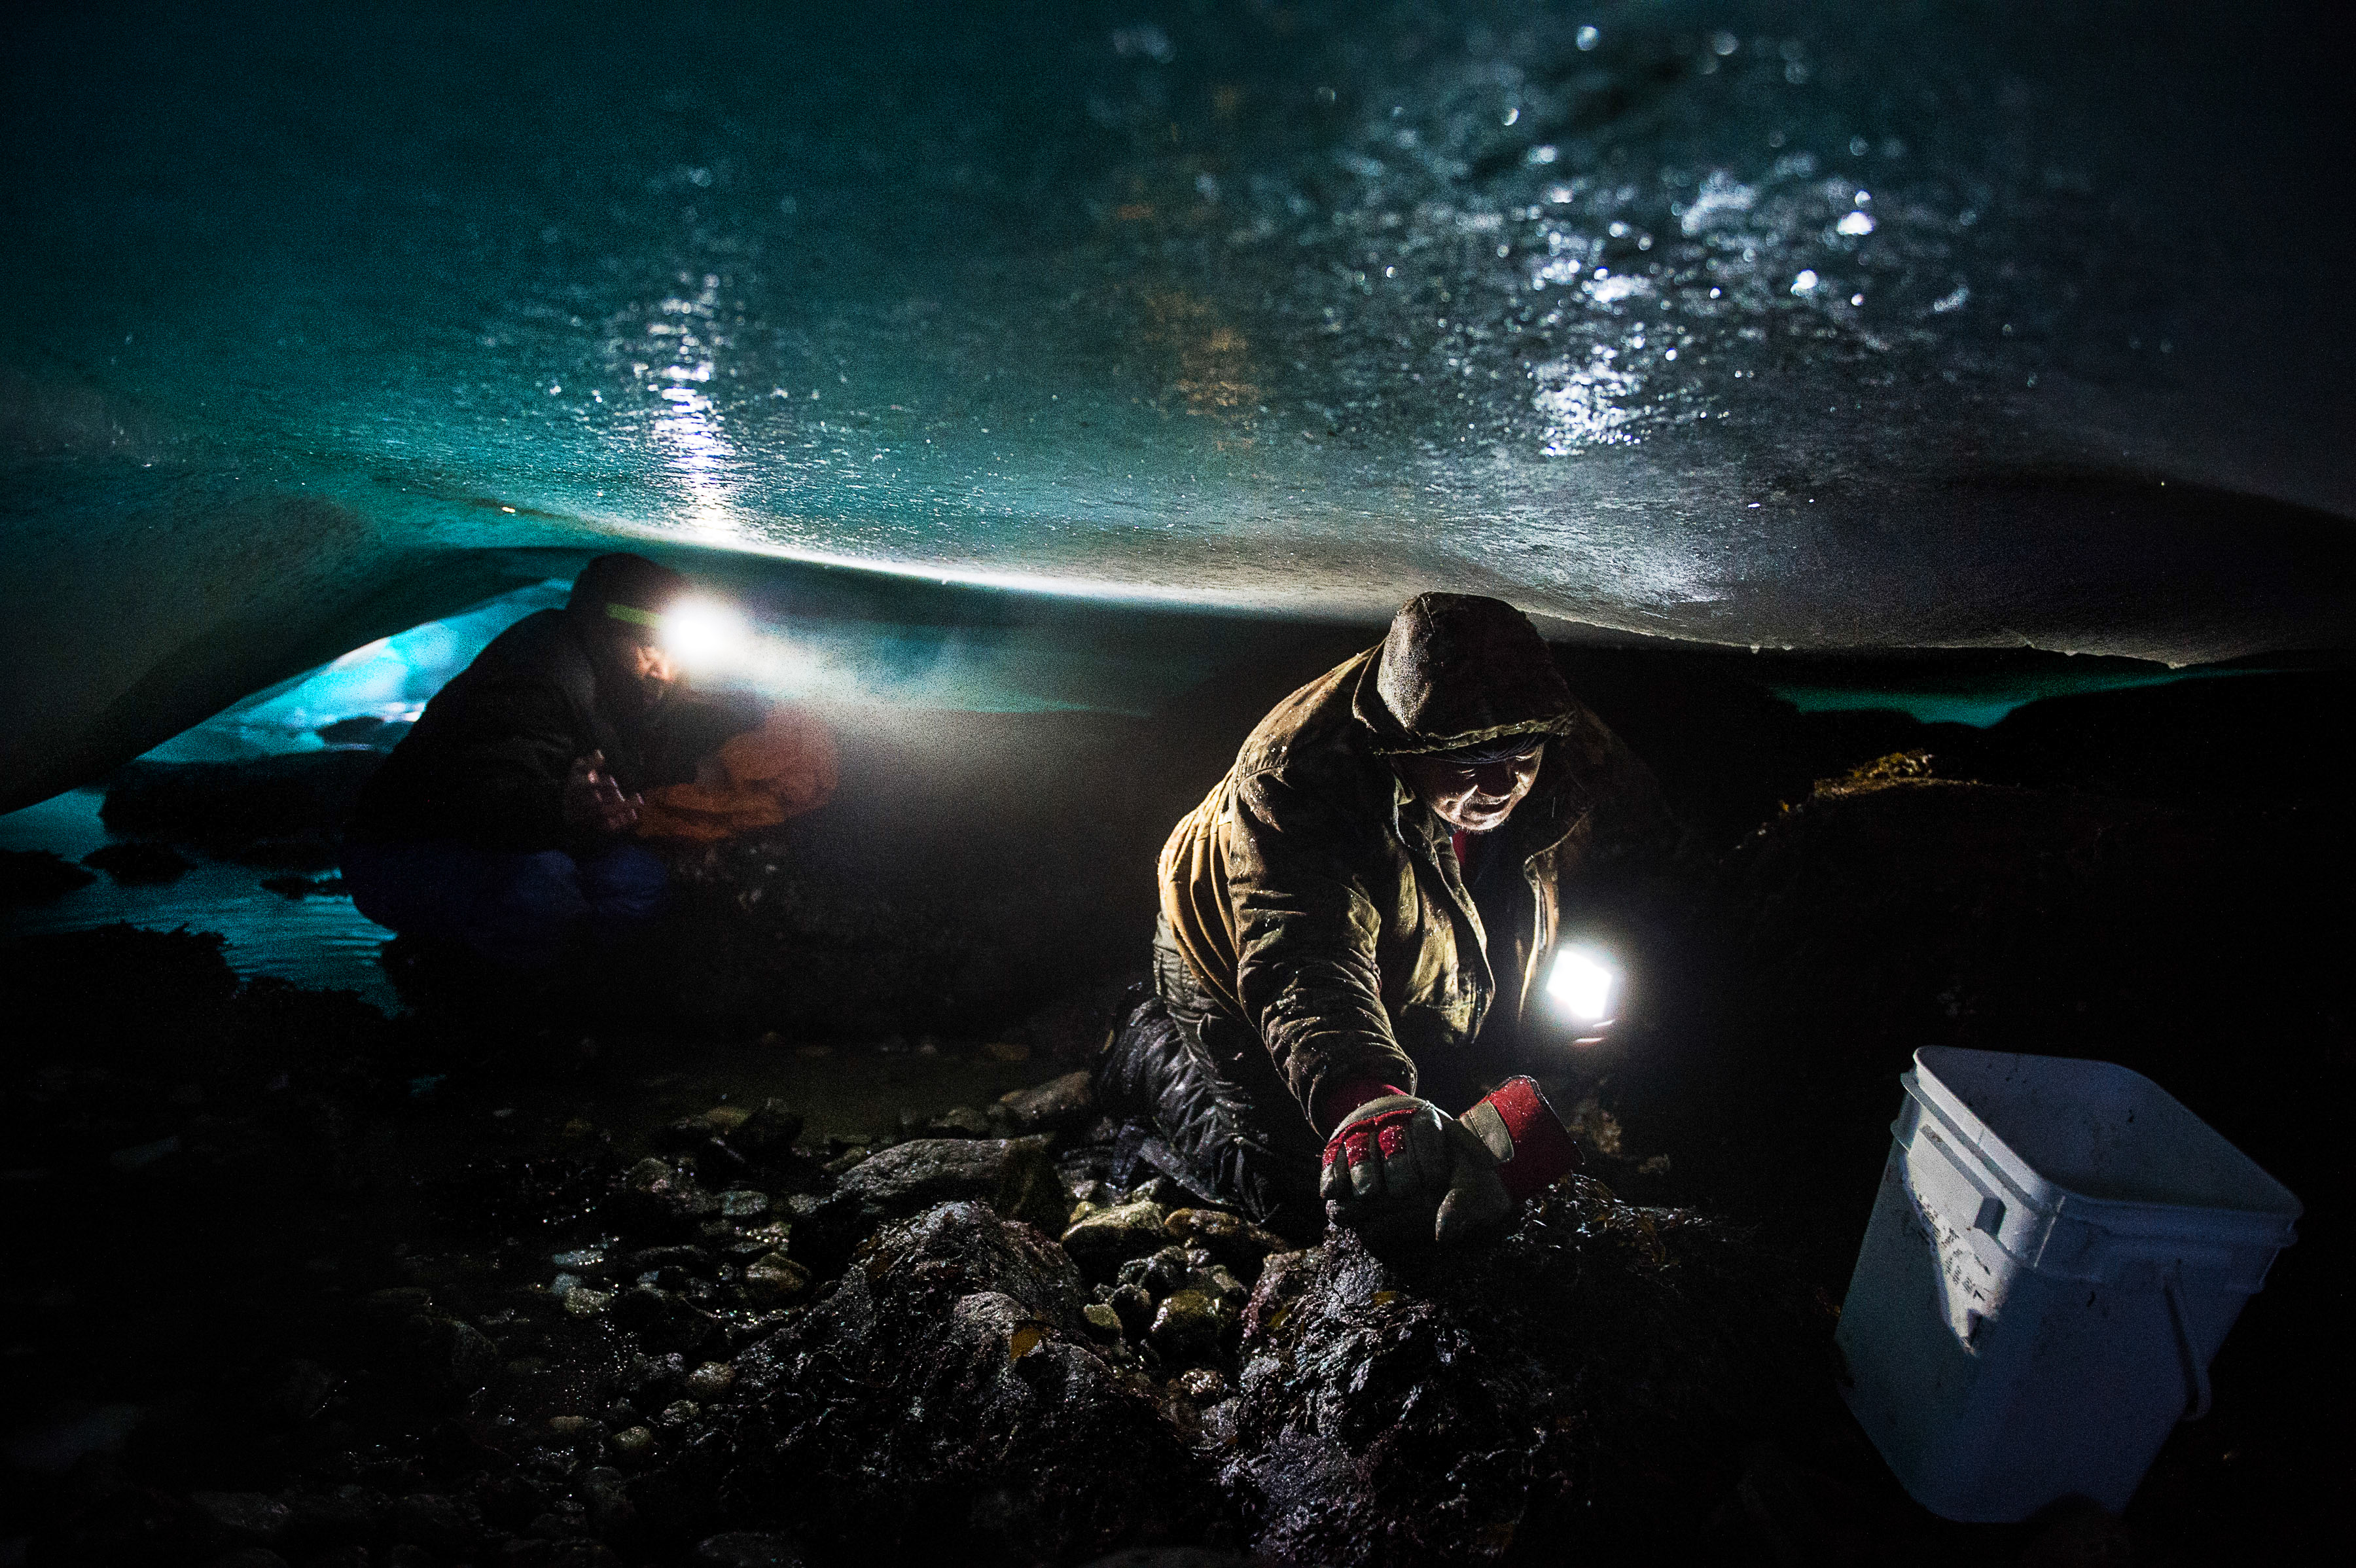 Adami Alaku, right, and Tiisi Qisiiq collects mussels under the sea ice near Kangiqsujuaq, Nunavik, Quebec, March 2, 2017. When the winter tide goes out on a northern Canadian bay, some Inuit clamber into the ice caves below to harvest fresh food. (Aaron Vincent Elkaim / The New York Times)